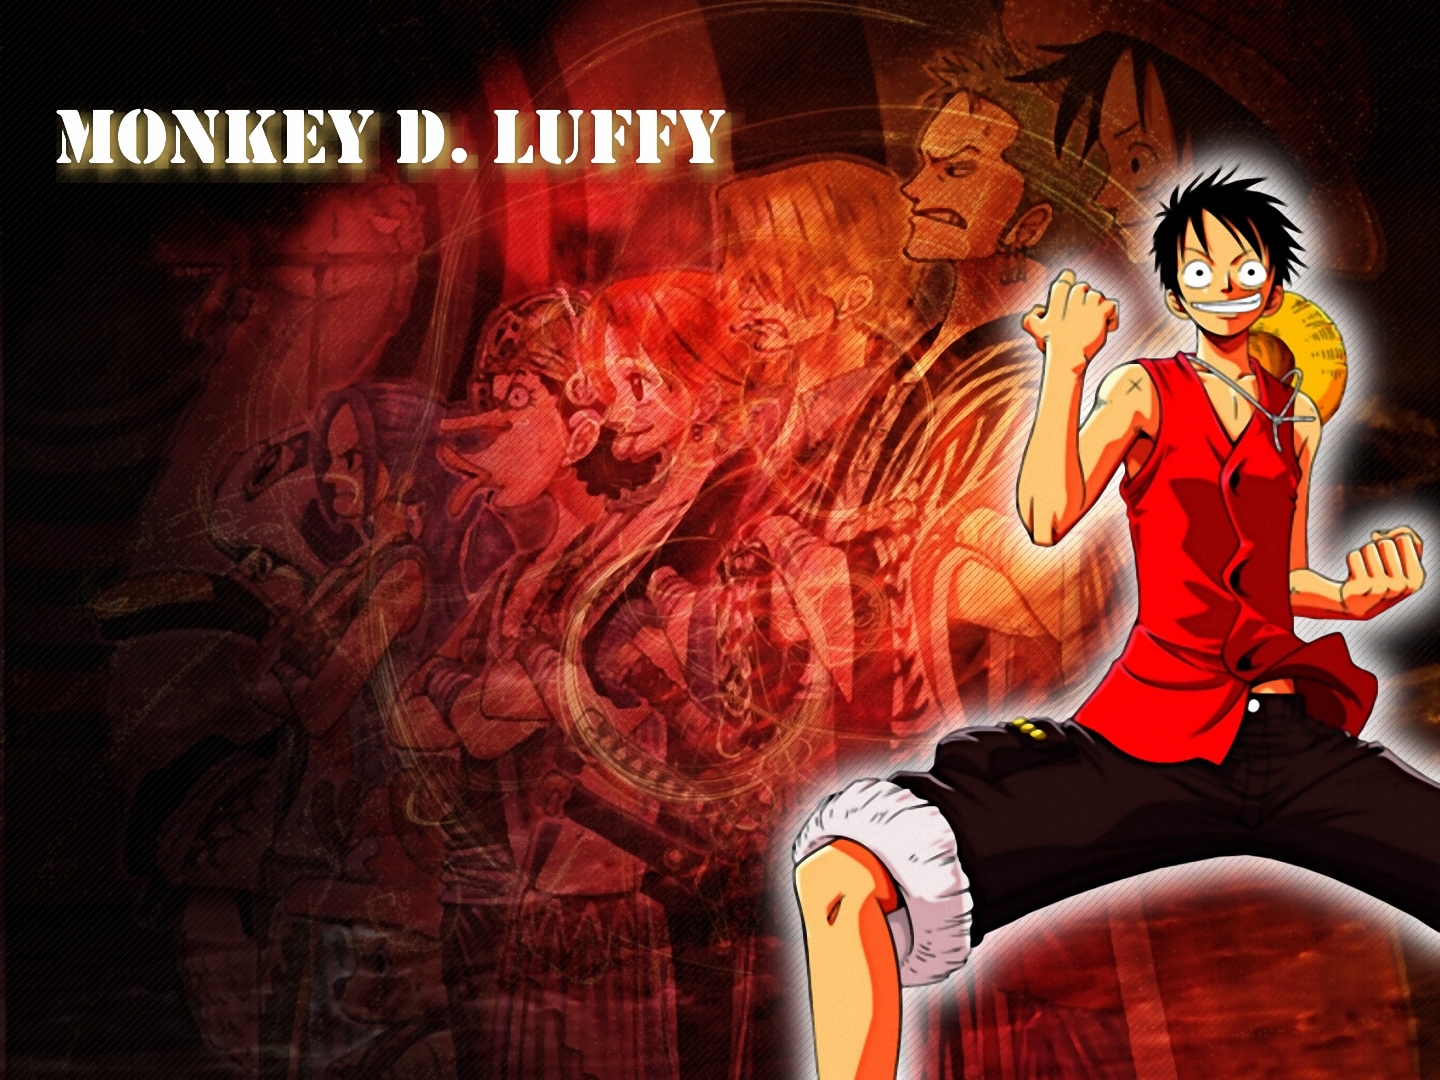 Monkey D. Luffy, the main character of One Piece, wearing a straw hat, smiling confidently.